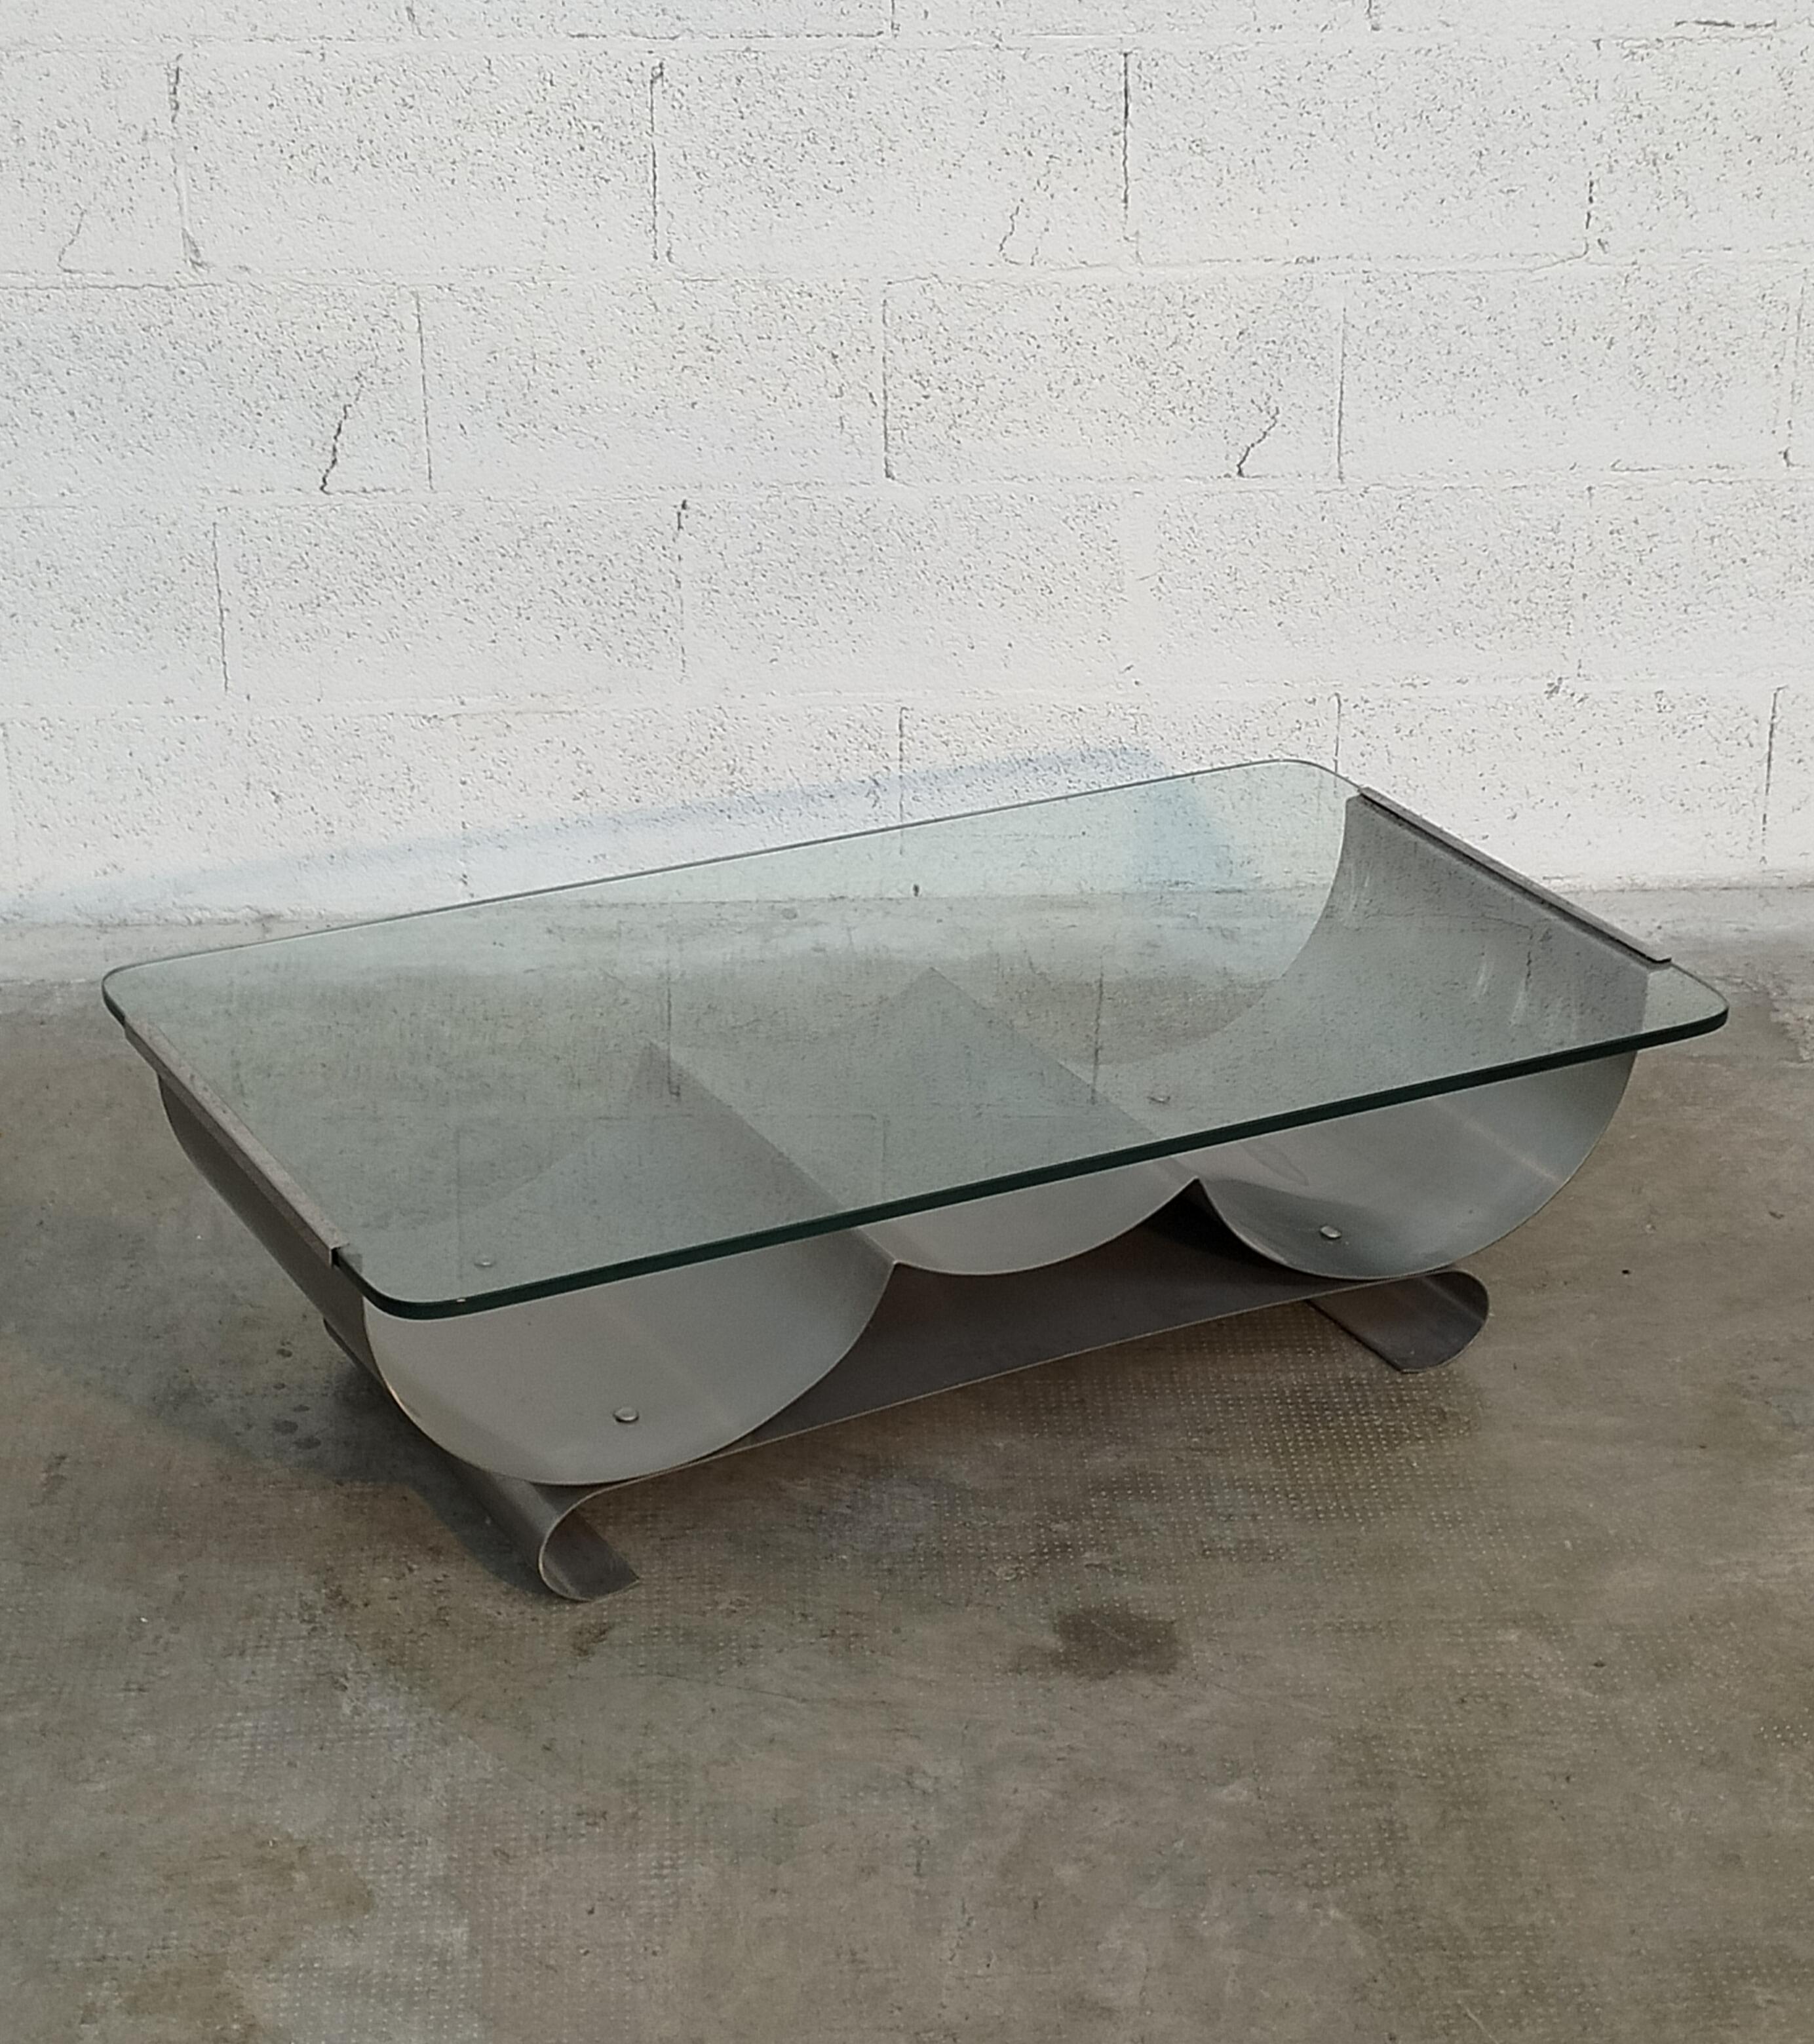 Late 20th Century Stainless Steel and Glass Coffee Table by Francois Monnet for Kappa 70s For Sale